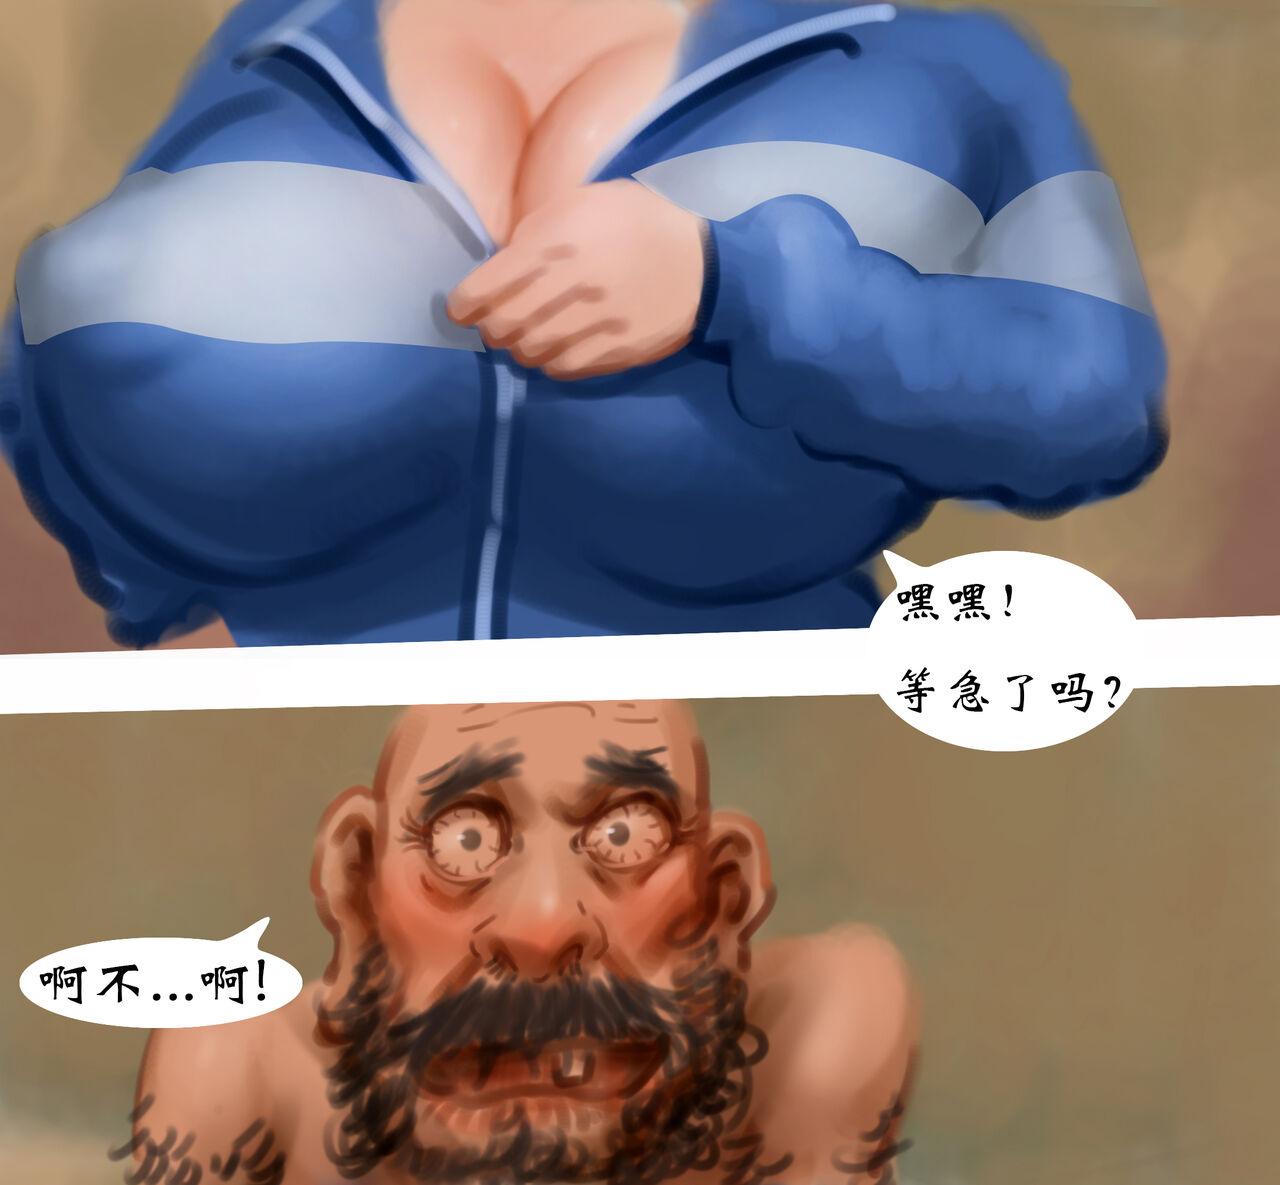 Cock 【变态少女】【彩色】-黑暗魔巢 Tinder - Picture 2